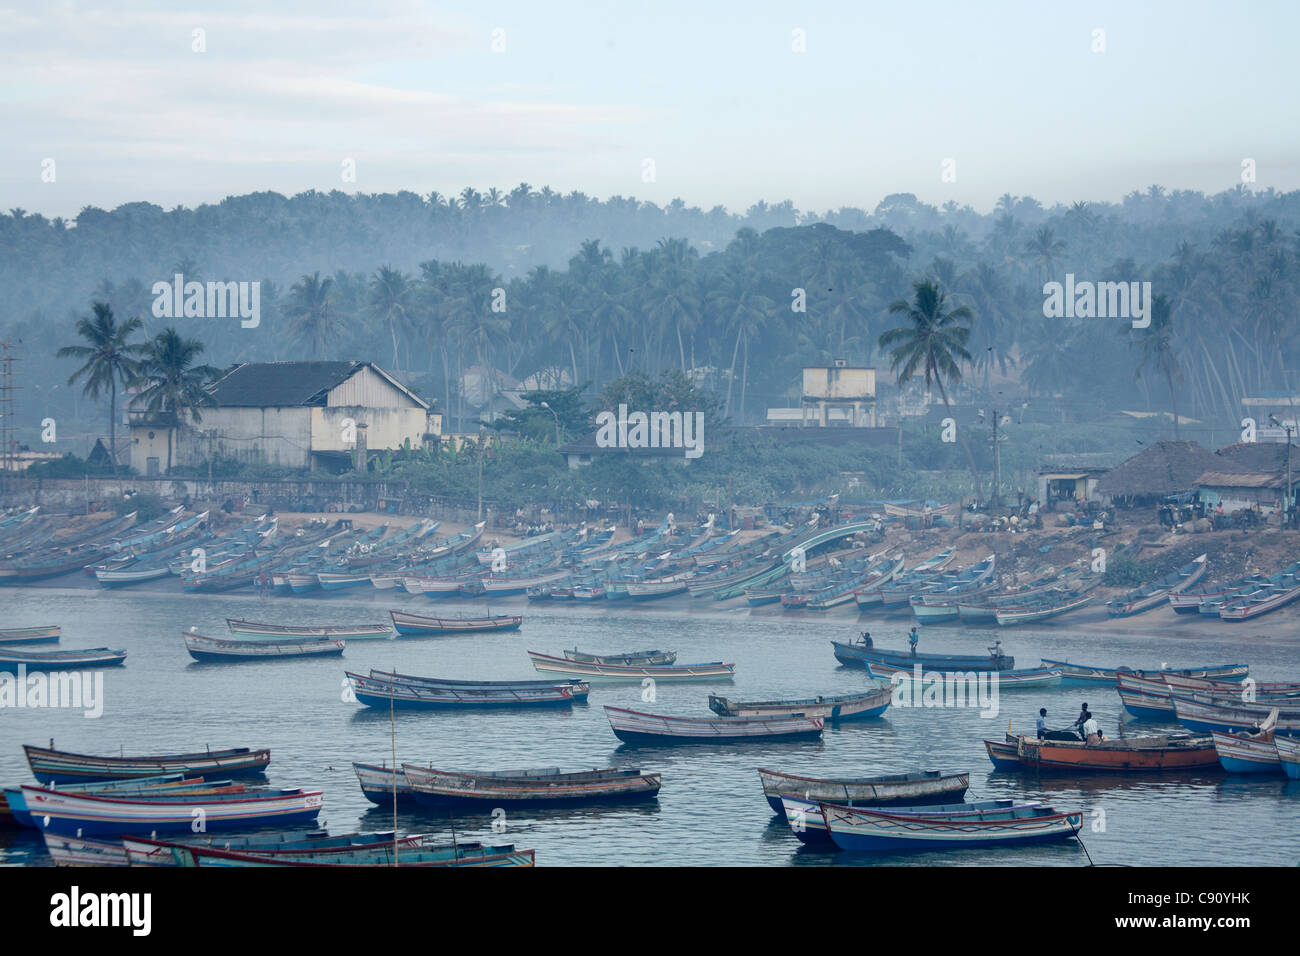 Vizhinjam is a fishing village and historic buildings from colonial history with a large natural port on the coast of Kerala. Stock Photo